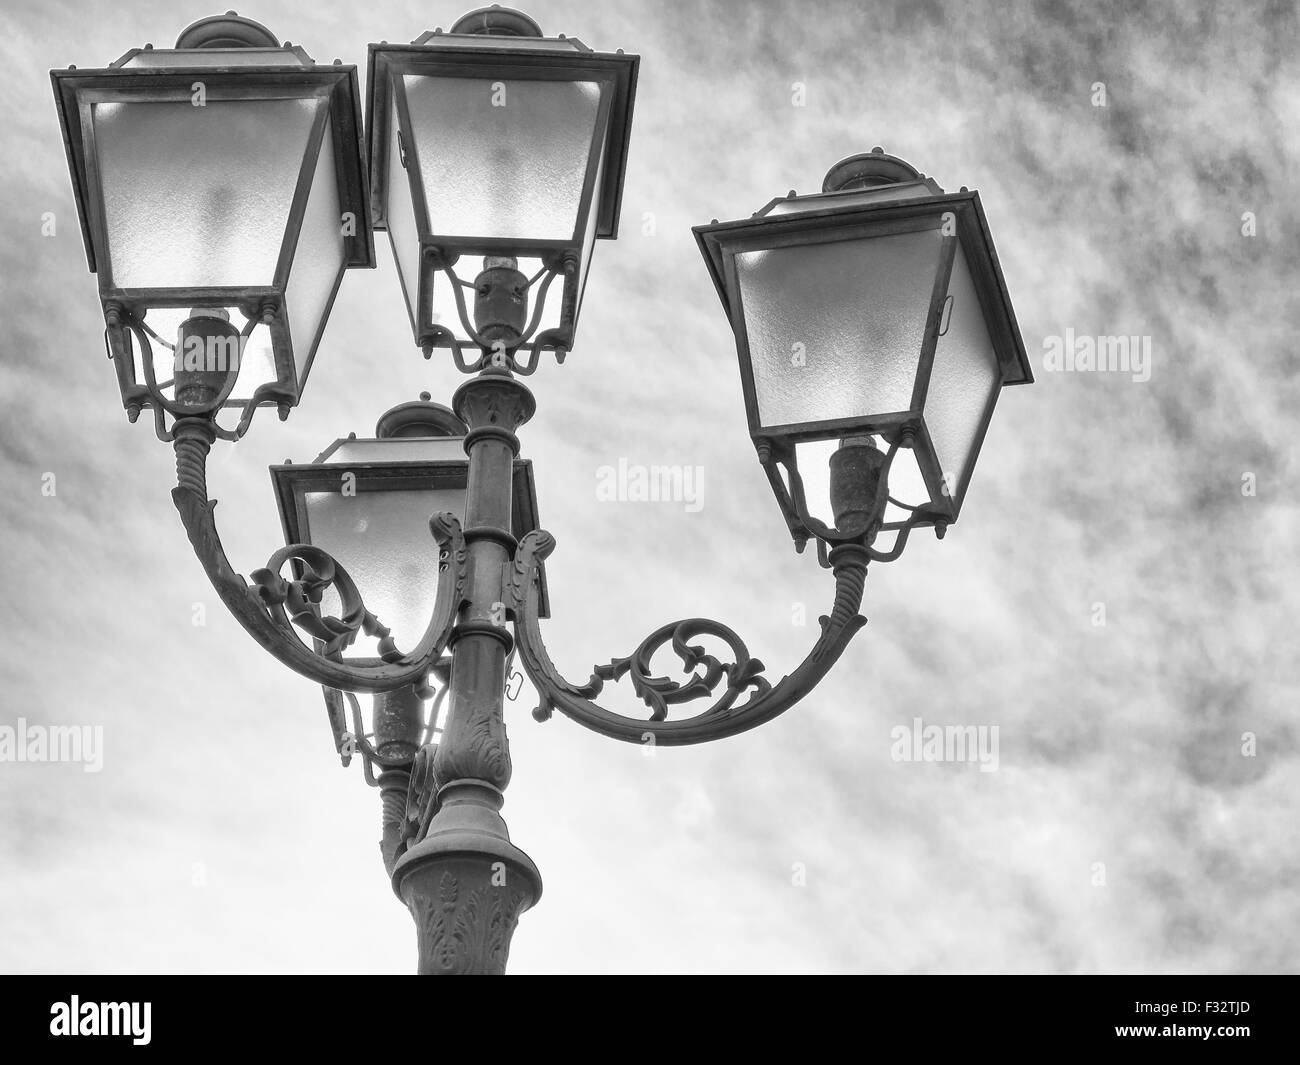 light up the sky with a bulb. Particular of a street lamp Stock Photo